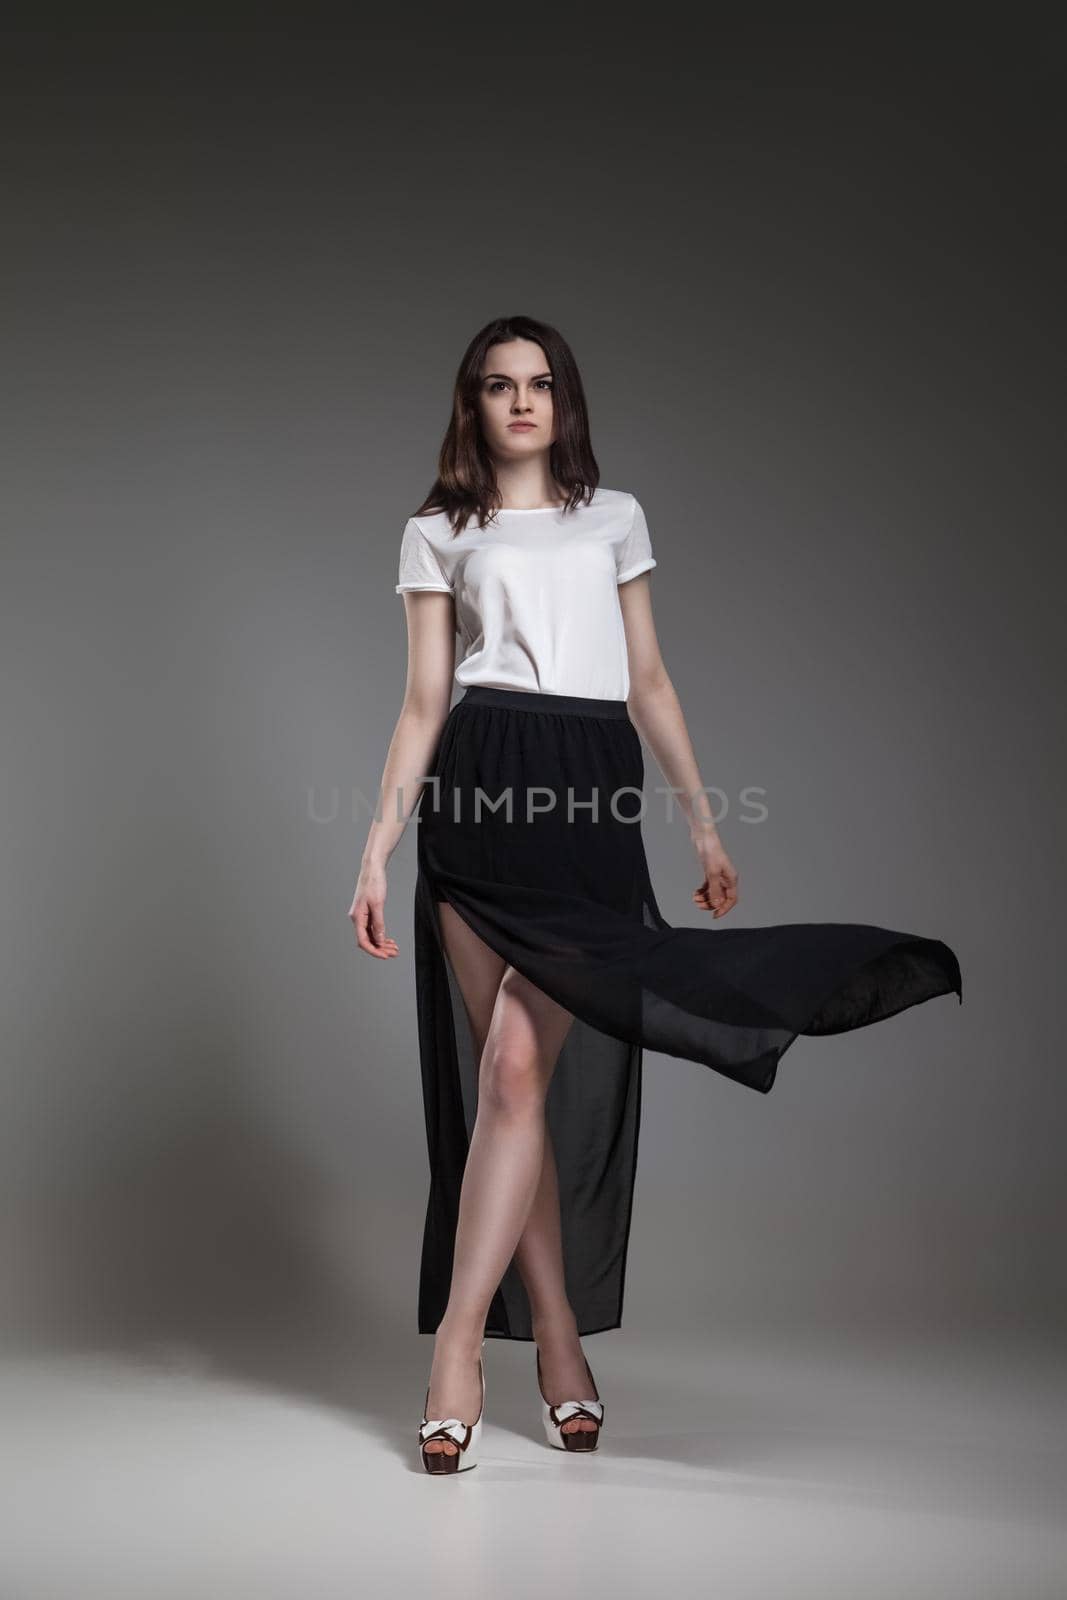 Beautiful model in white blouse and black skirt posing on grey background